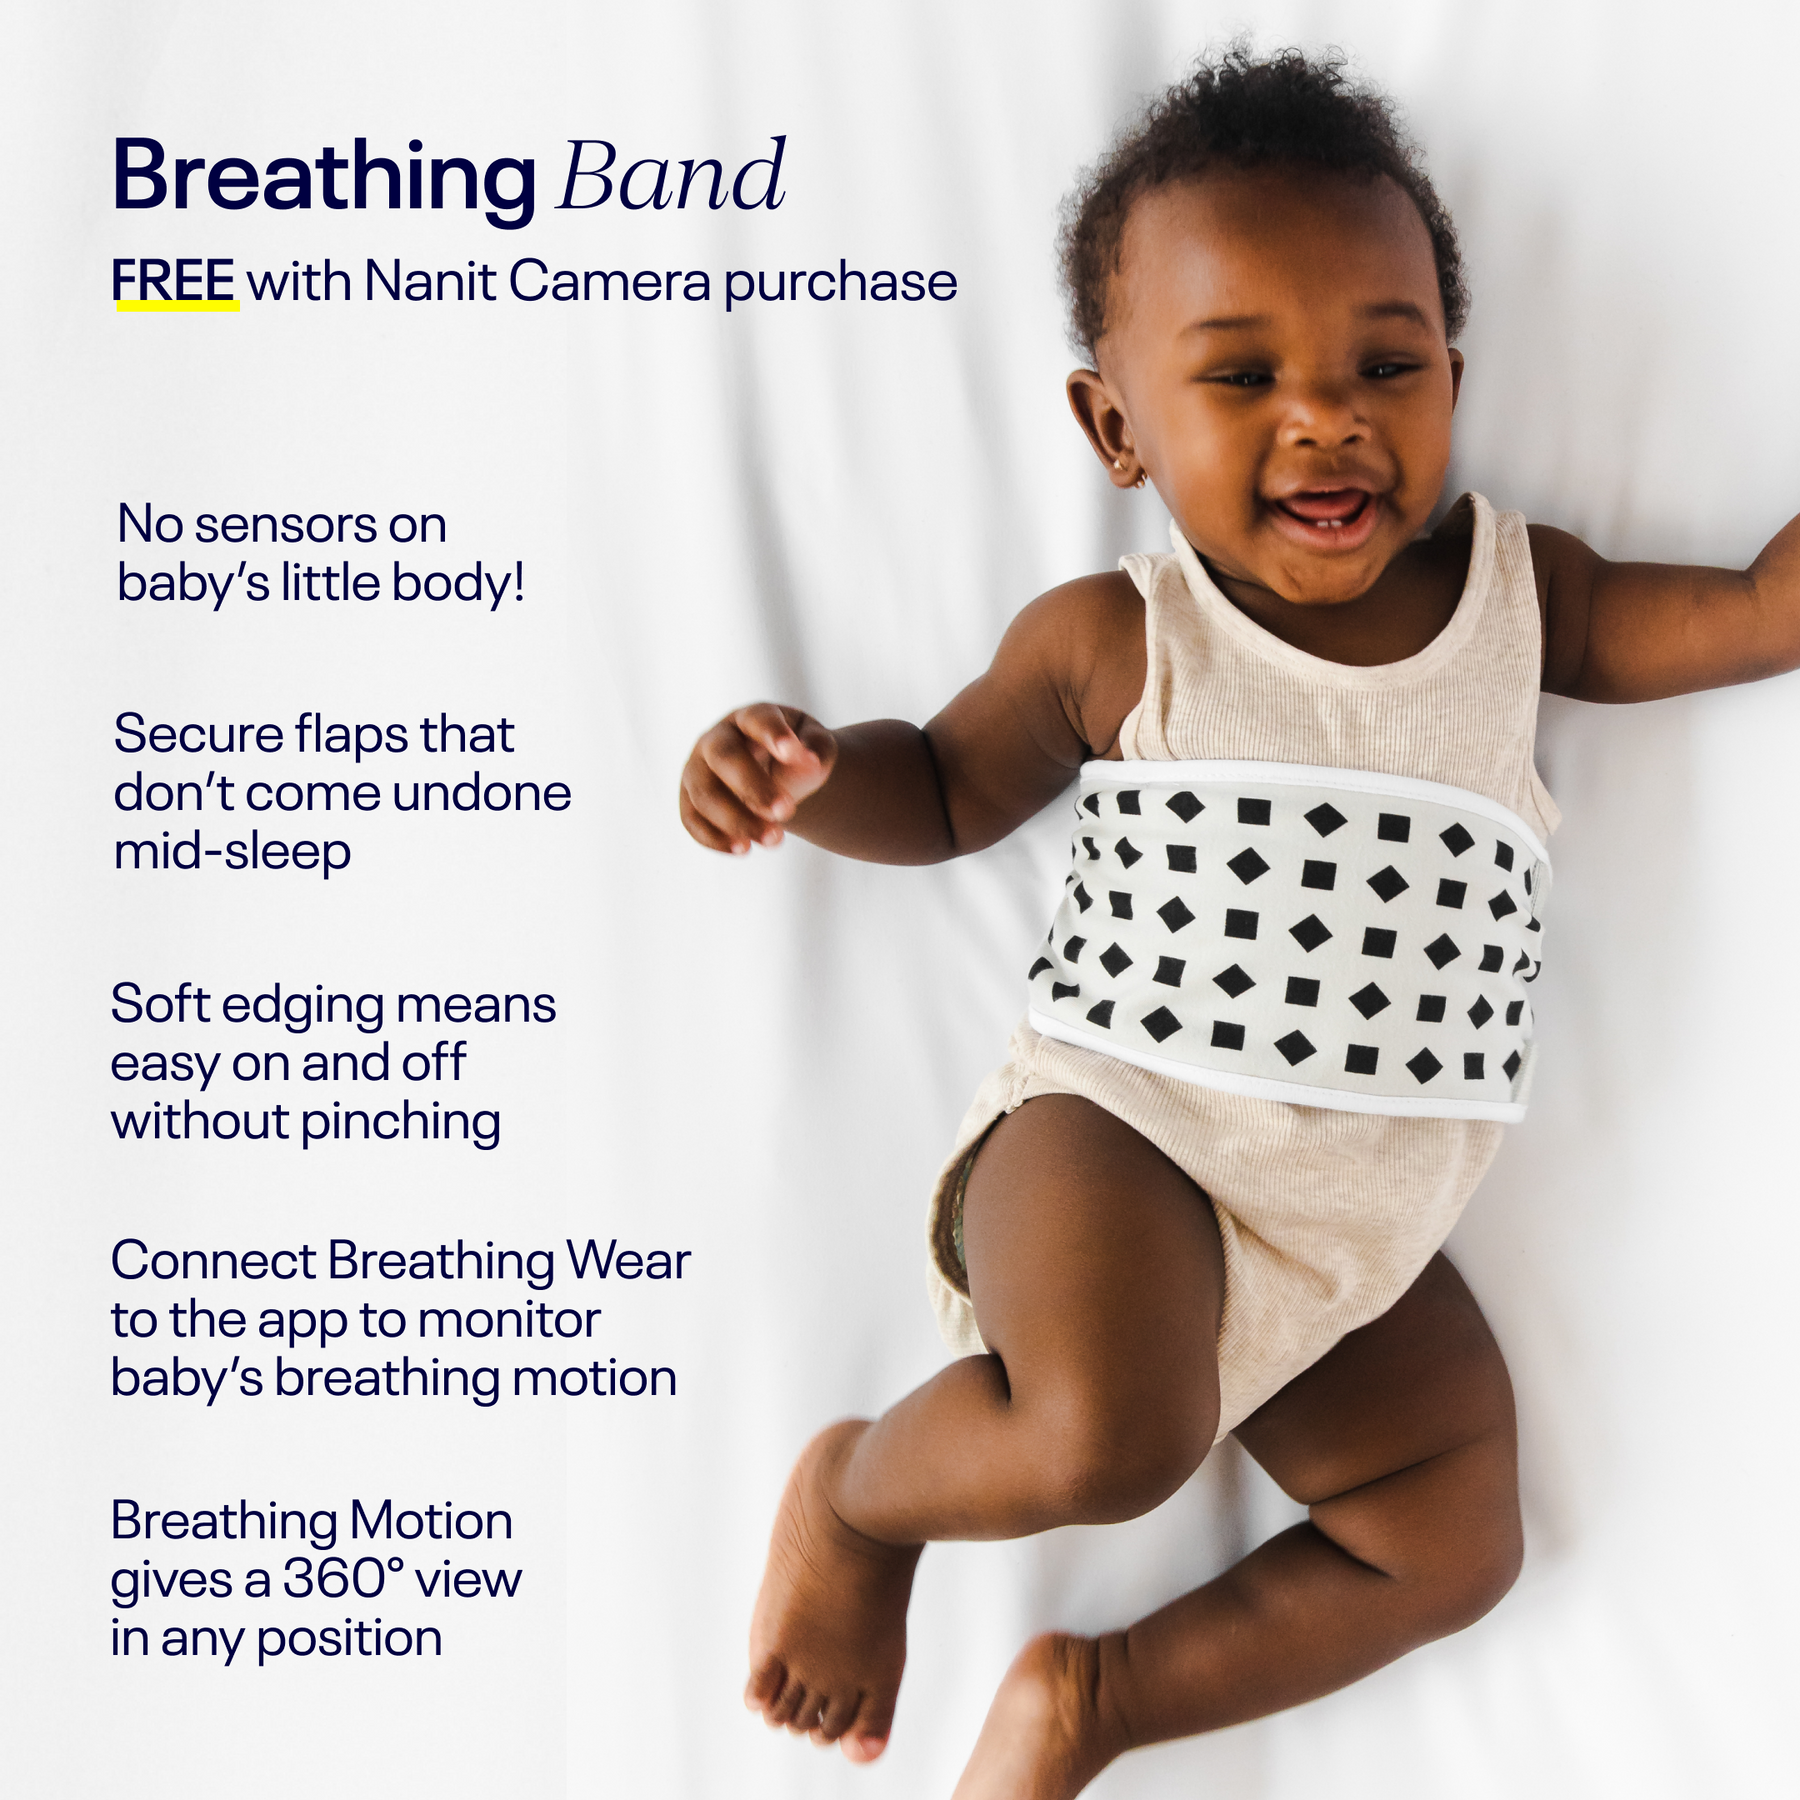 Breathing Band comes free with Nanit Camera purchase. Mentioning features including no sensors and connecting to Nanit app.